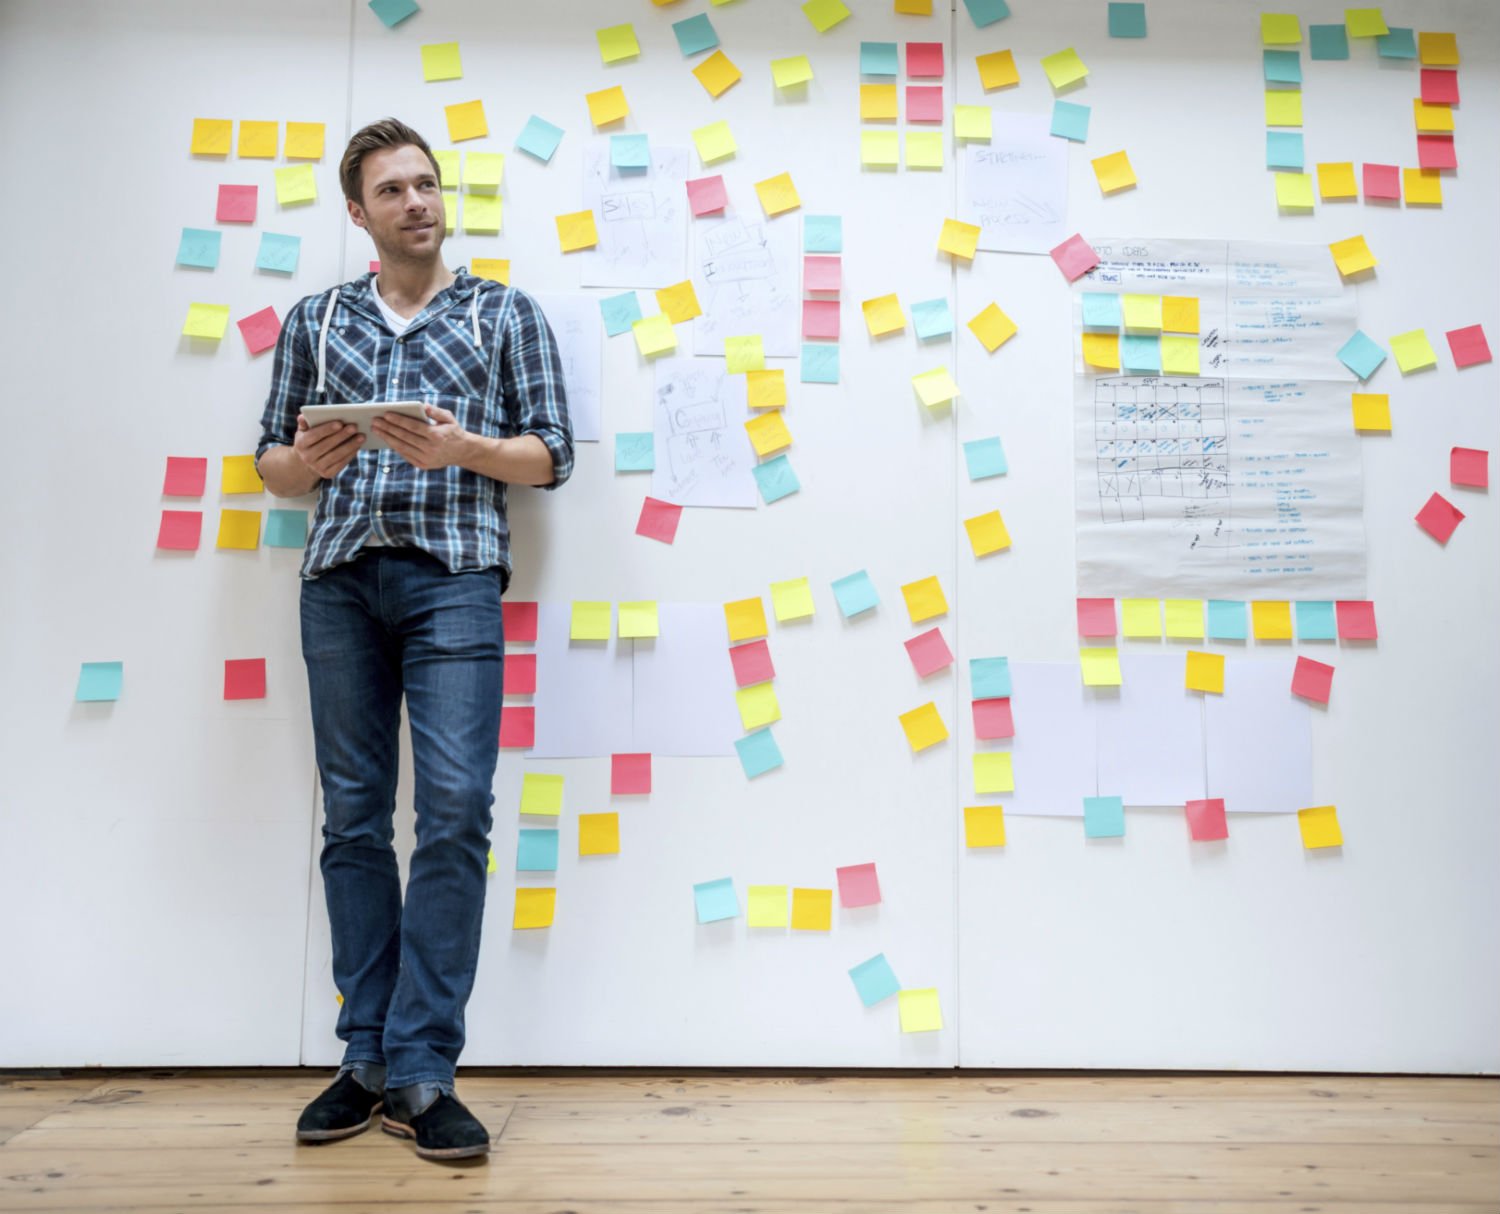 Entrepreneur leaning on a wall covered in post-it notes